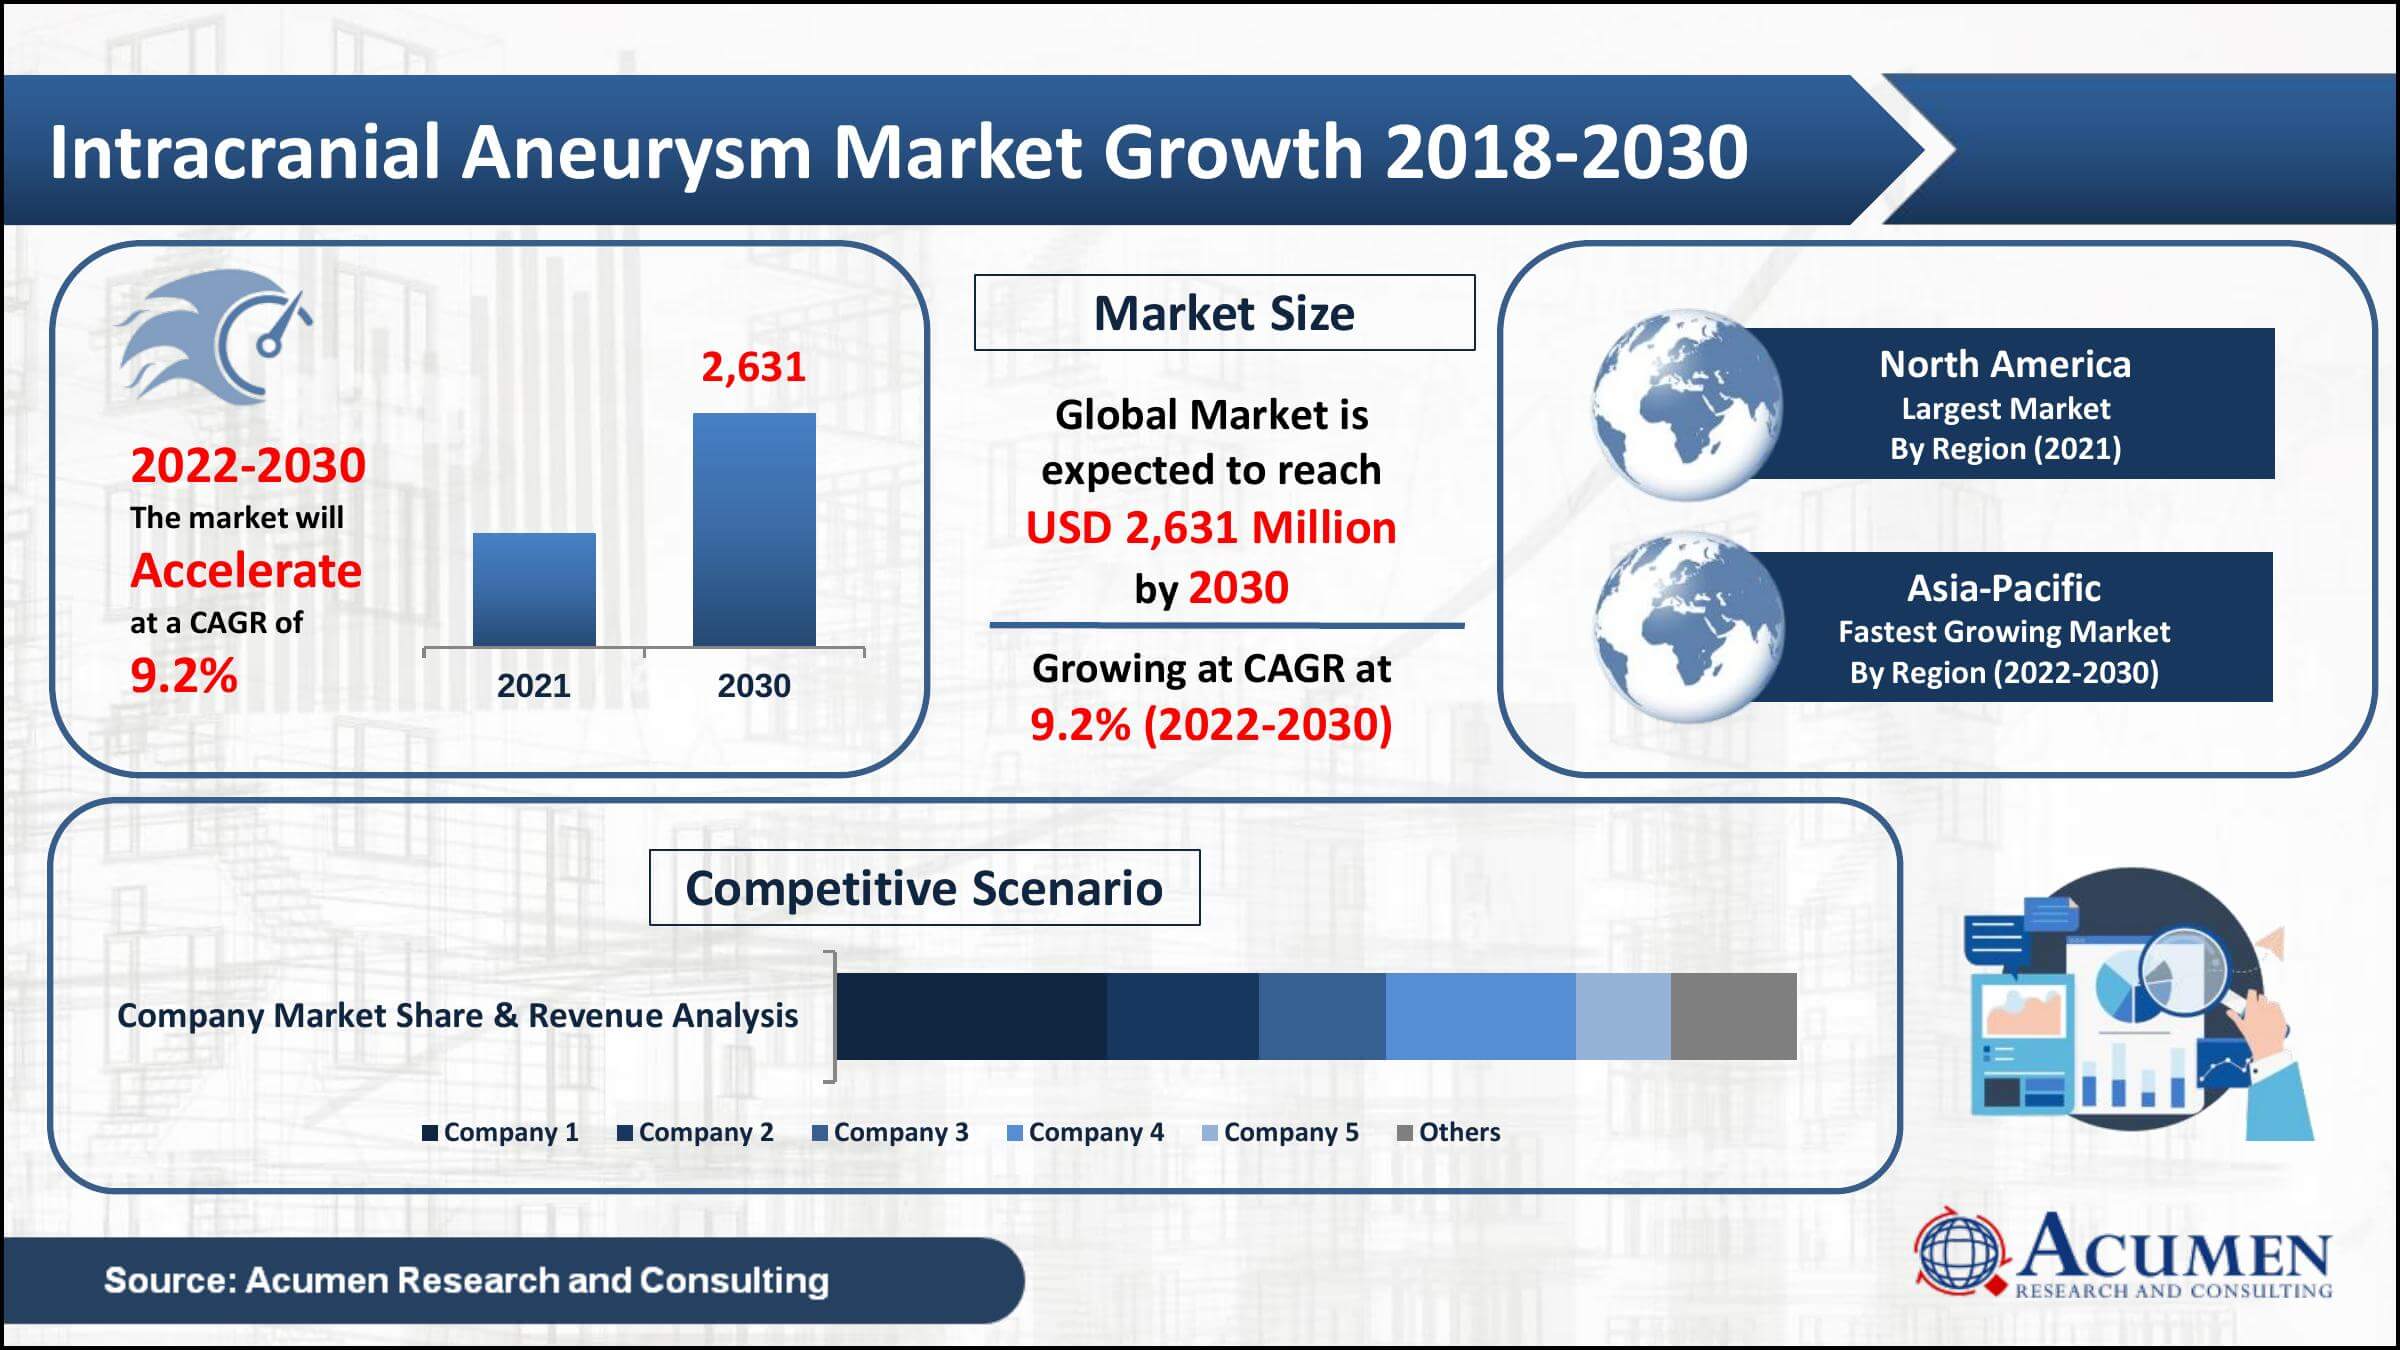 Global intracranial aneurysm market value was worth USD 1,216 Million in 2021, with a 9.2% CAGR from 2022 to 2030